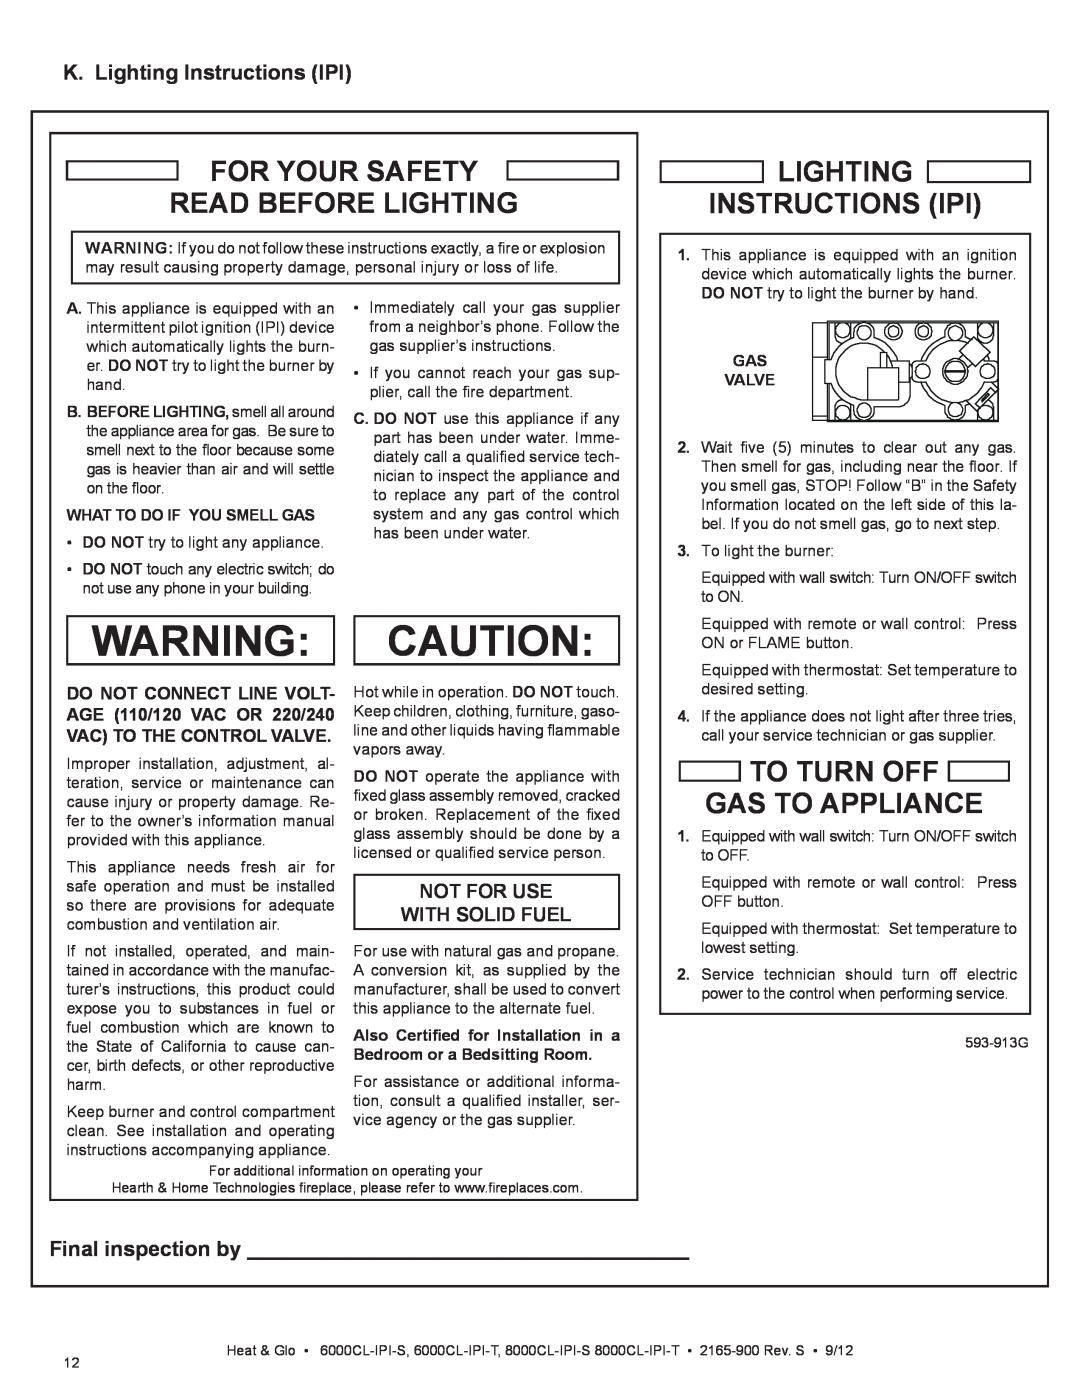 Heat & Glo LifeStyle 8000CL-IPI-S For Your Safety Read Before Lighting, Lighting Instructions Ipi, Final inspection by 